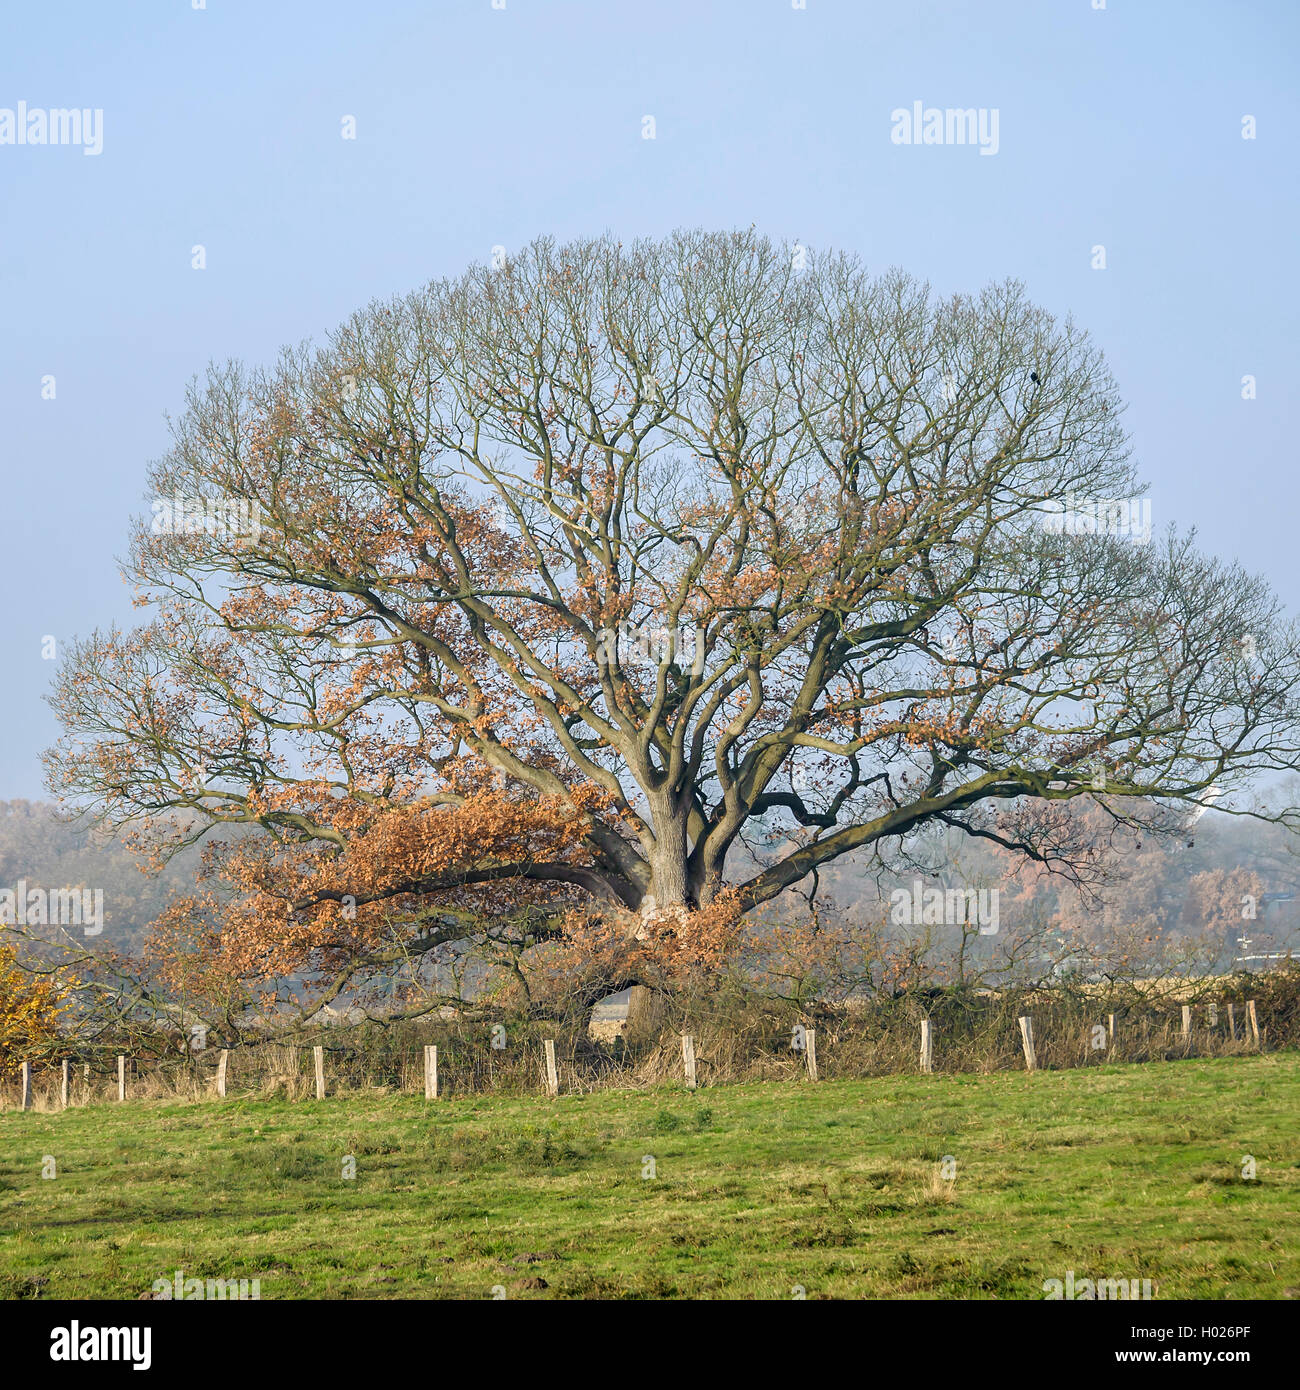 Sessile oak (Quercus petraea), the Mackensen-Eiche in Worpswede, Germany, Lower Saxony, Worpswede Stock Photo